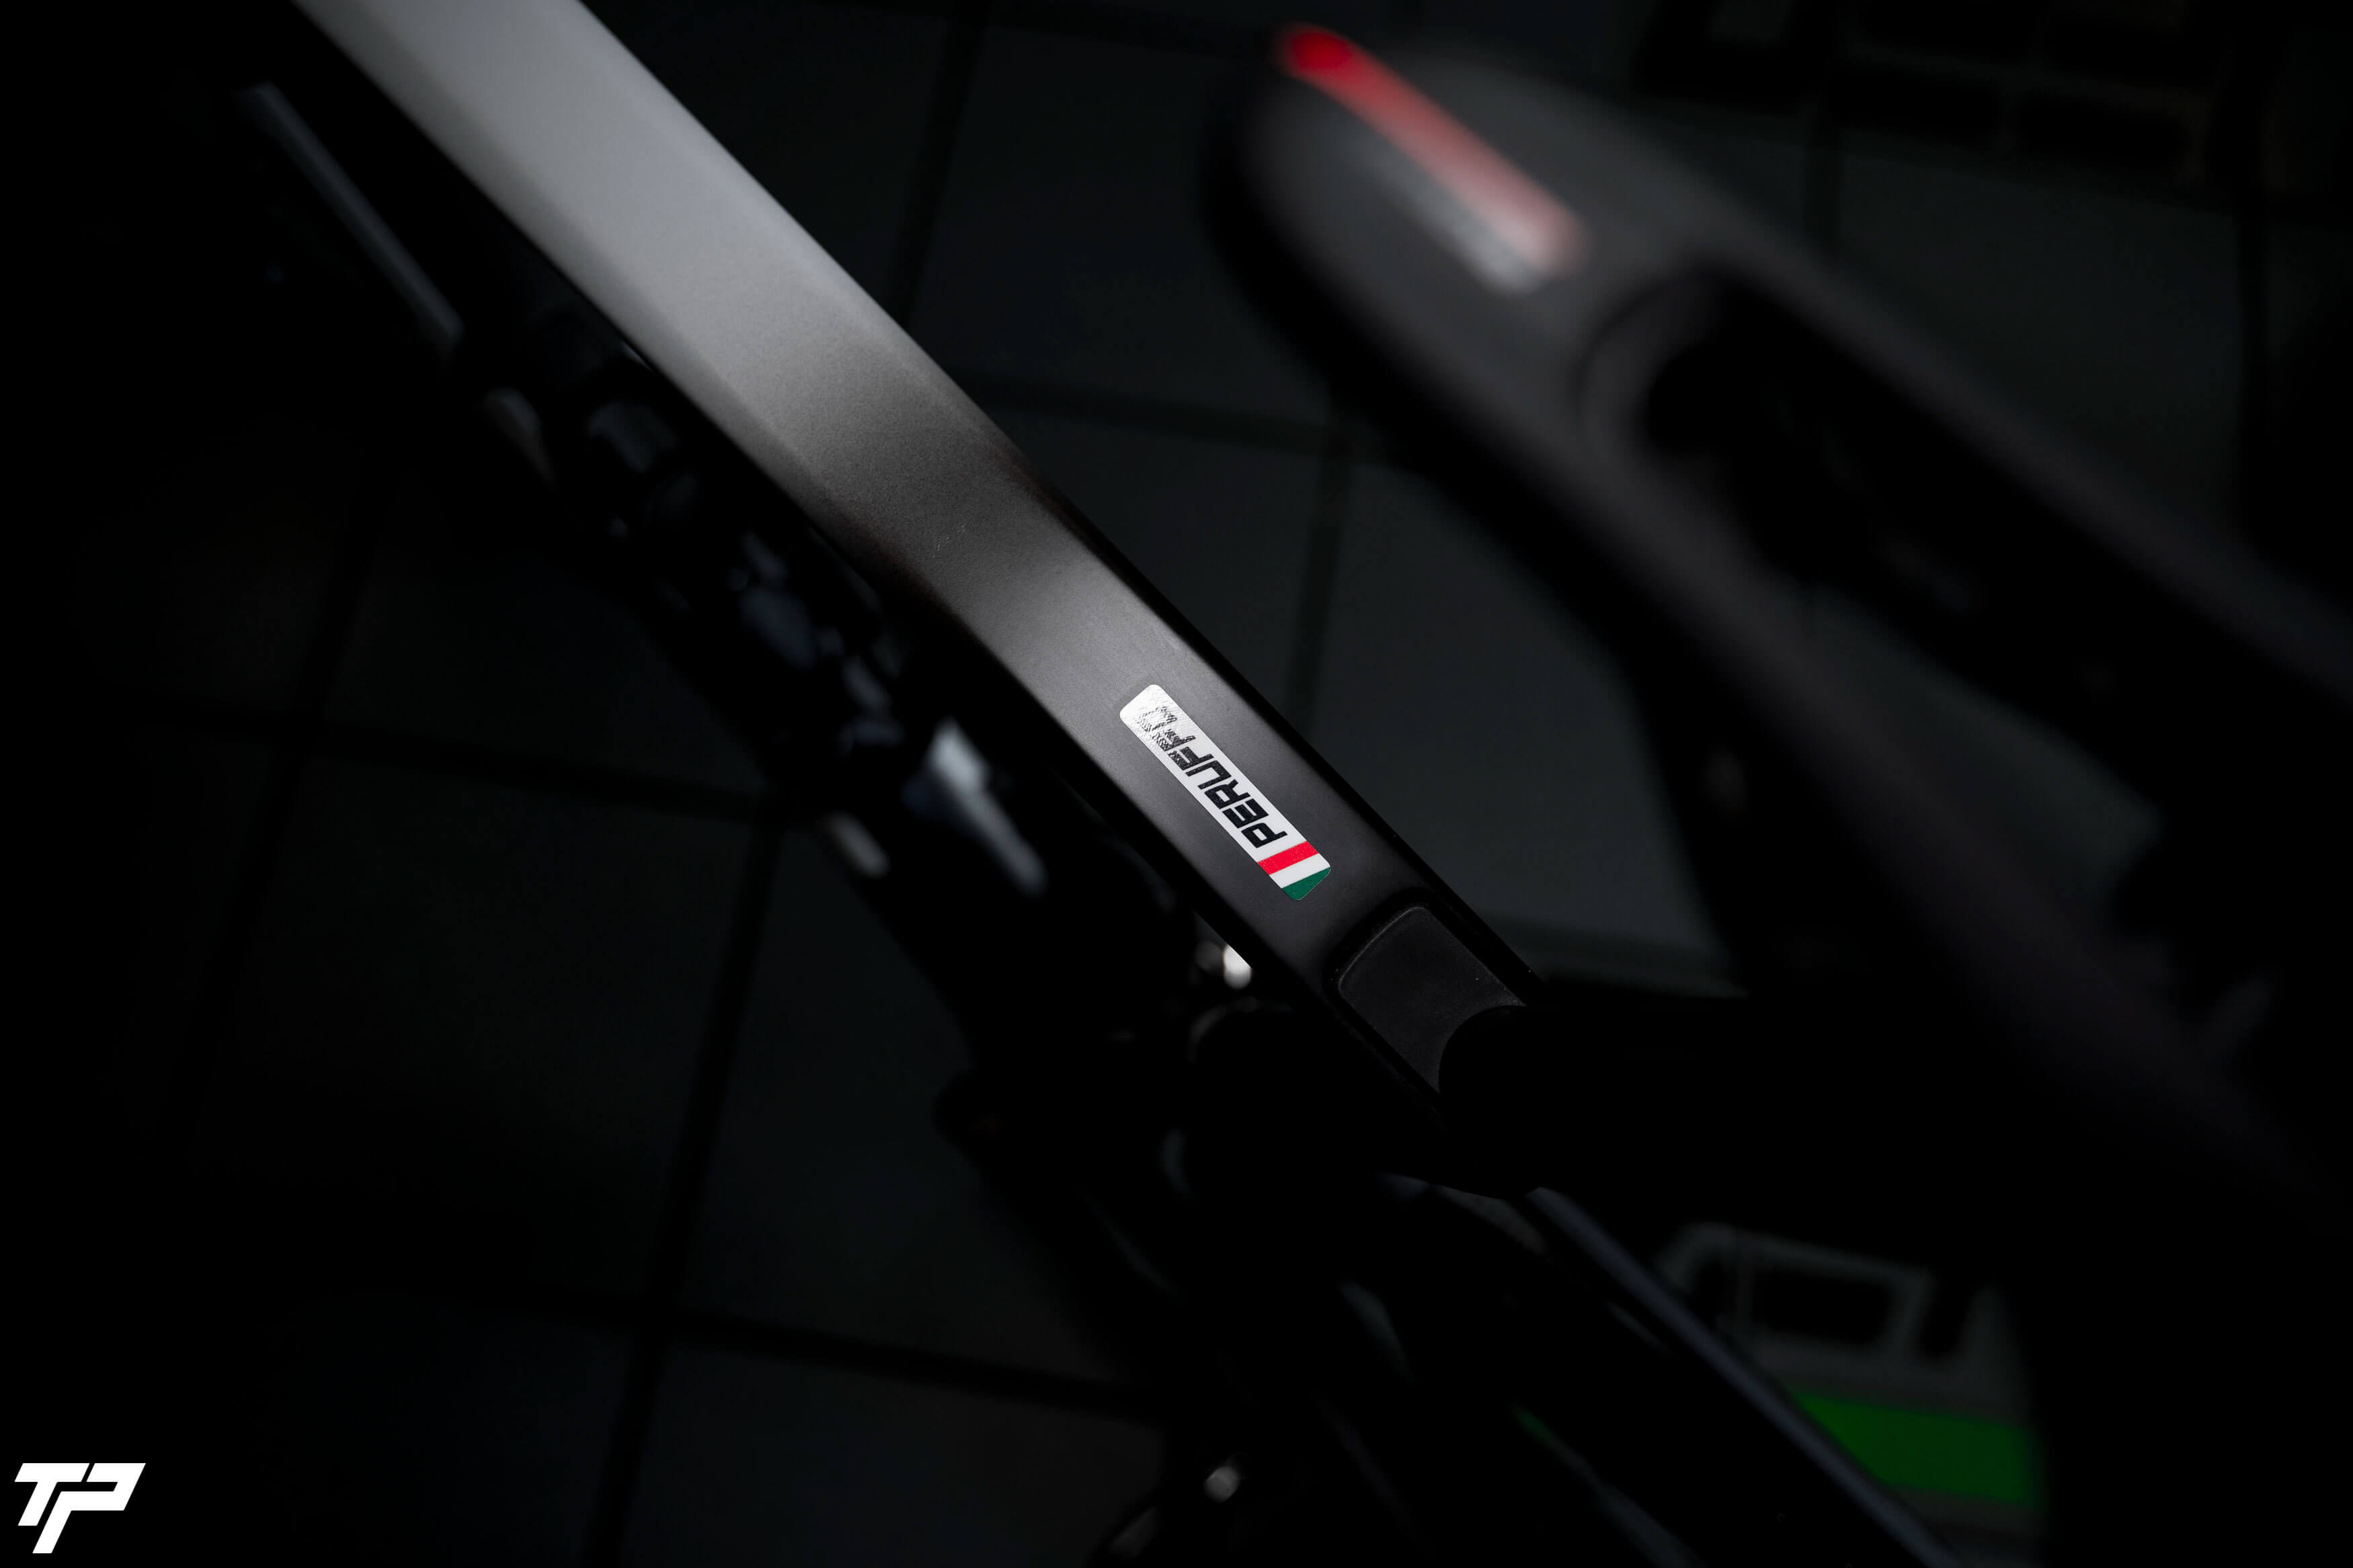 BMC TEAMMACHINE SLR01, SWISS QUALITY AND PERFORMANCE WITHOUT COMPROMISE